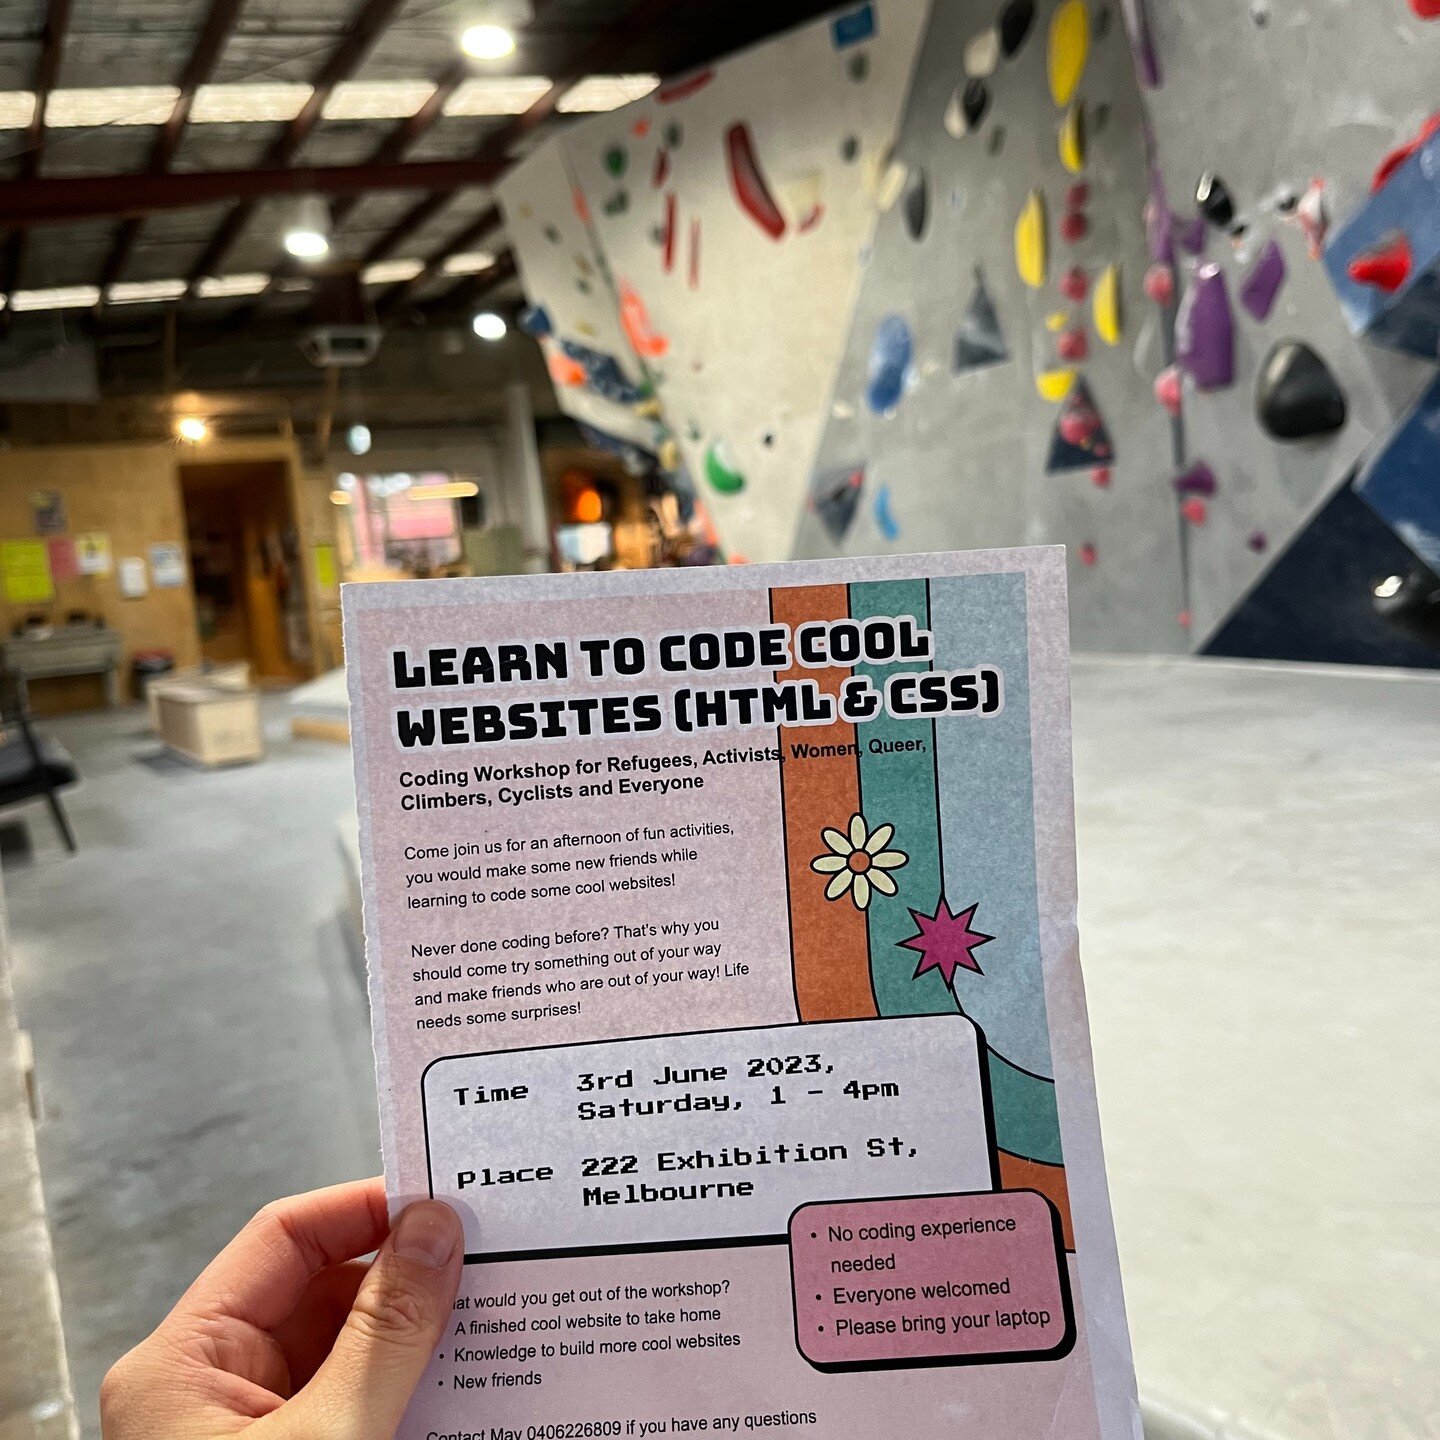 Hi climber friends, what is the best finger exercise? Coding. Come join our coding workshop in between your climbs, exercise the little brains in your fingers and climb smarter next time!

Sign up through our bio link.